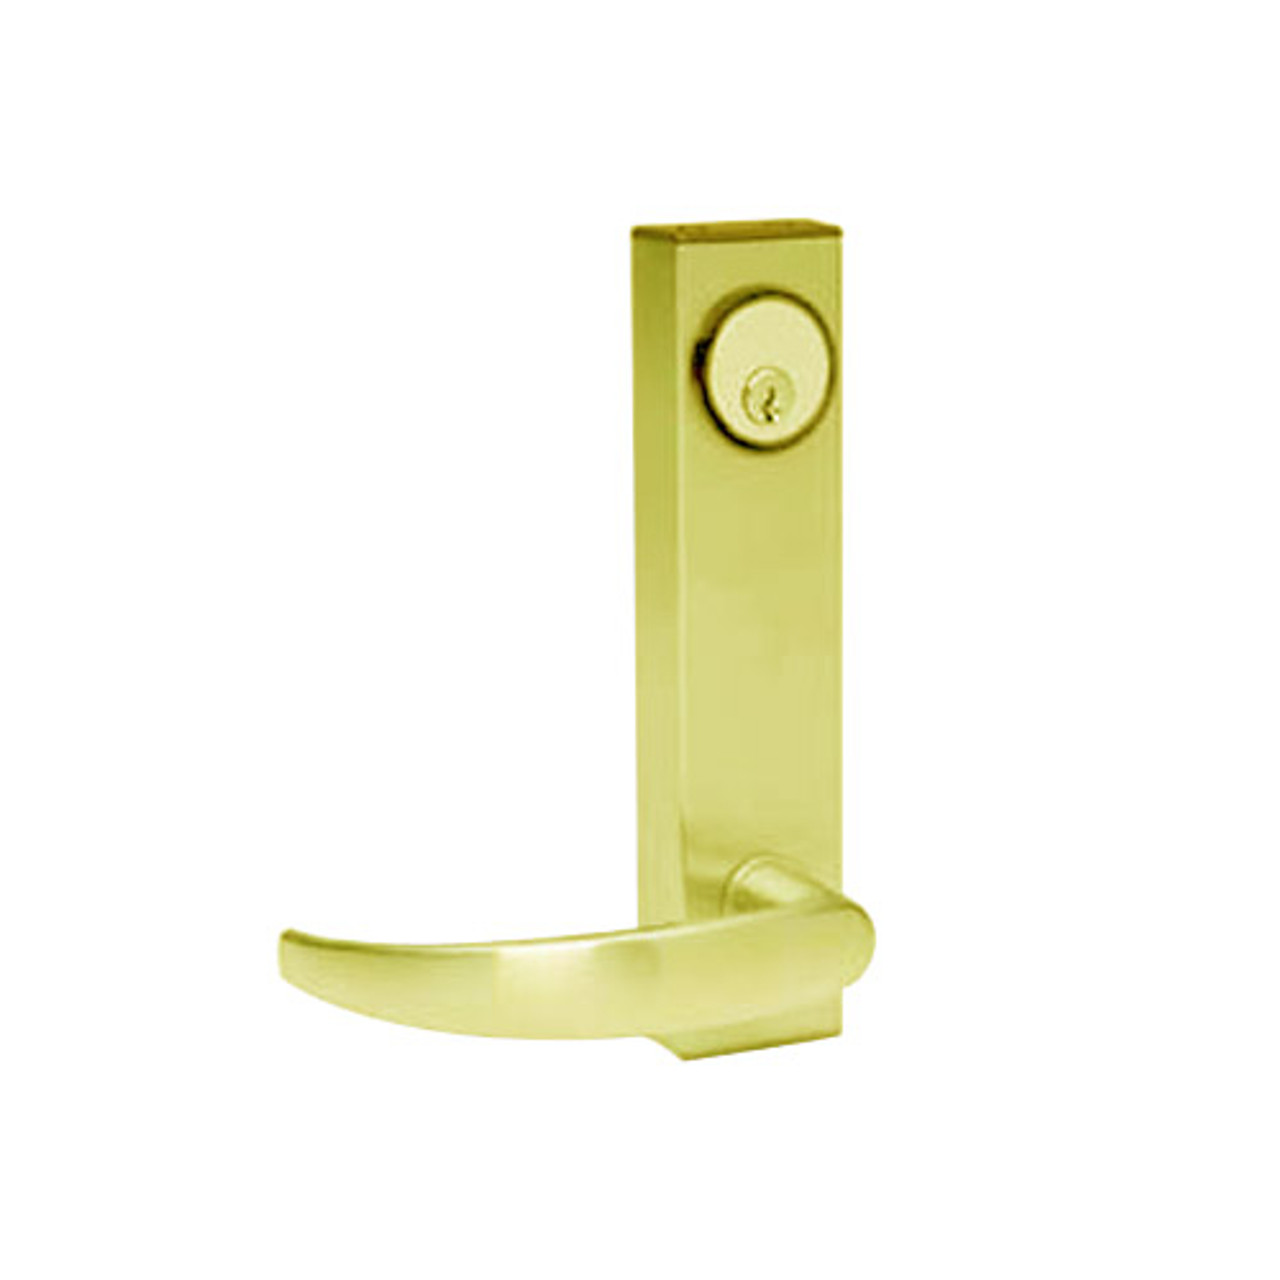 3080E-01-0-91-55 US3 Adams Rite Electrified Entry Trim with Curve Lever in Bright Brass Finish